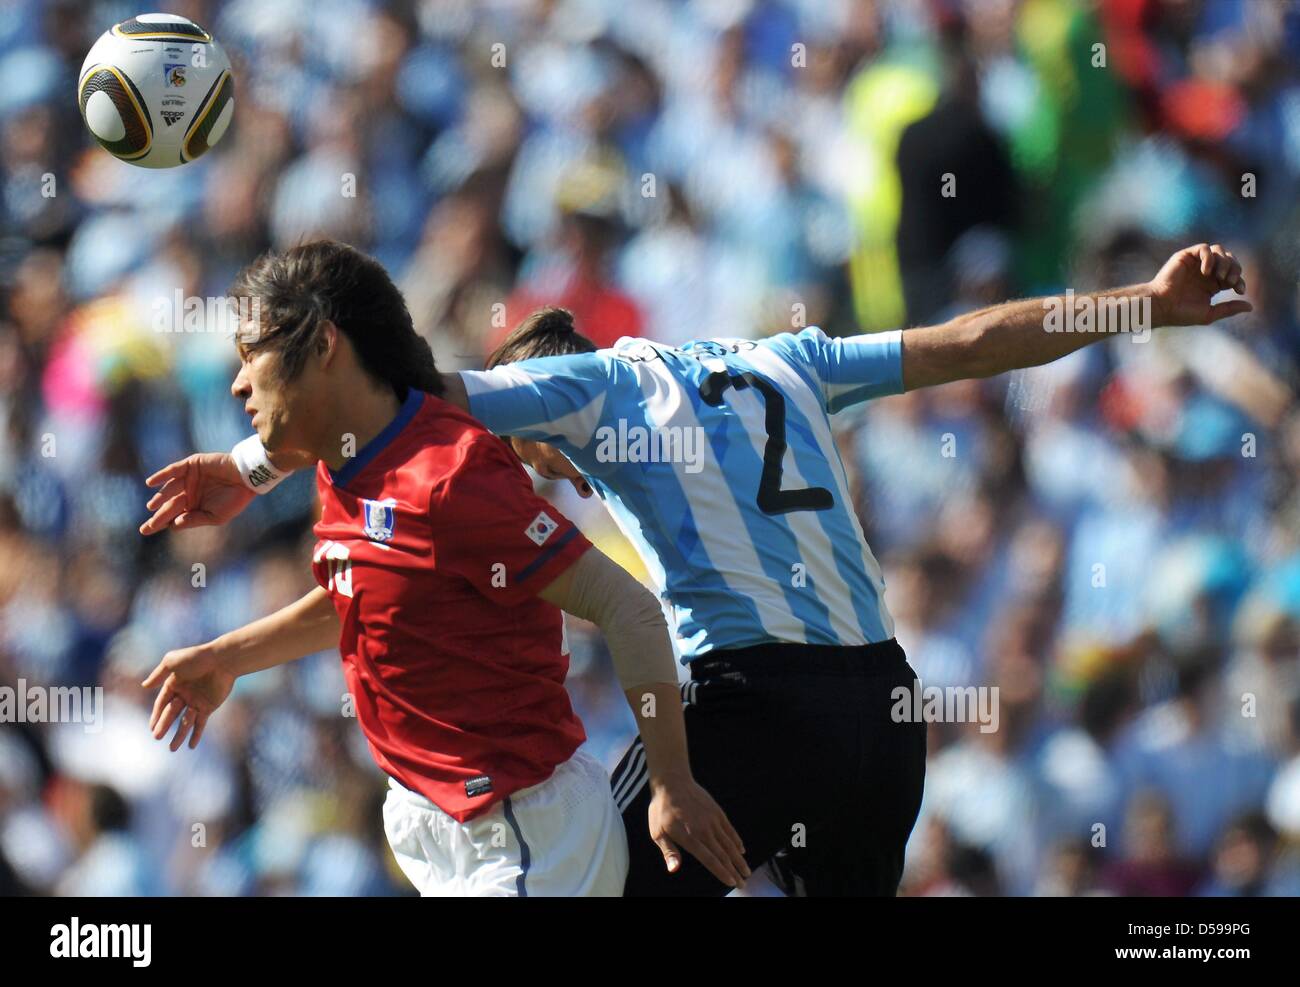 Martin Demichelis (R) of Argentina vies with Park Chu Young (L) of South Korea during the FIFA World Cup 2010 group B match between Argentina and South Korea at Soccer City Stadium in Johannesburg, South Africa 17 June 2010. Photo: Ronald Wittek dpa - Please refer to http://dpaq.de/FIFA-WM2010-TC  +++(c) dpa - Bildfunk+++ Stock Photo